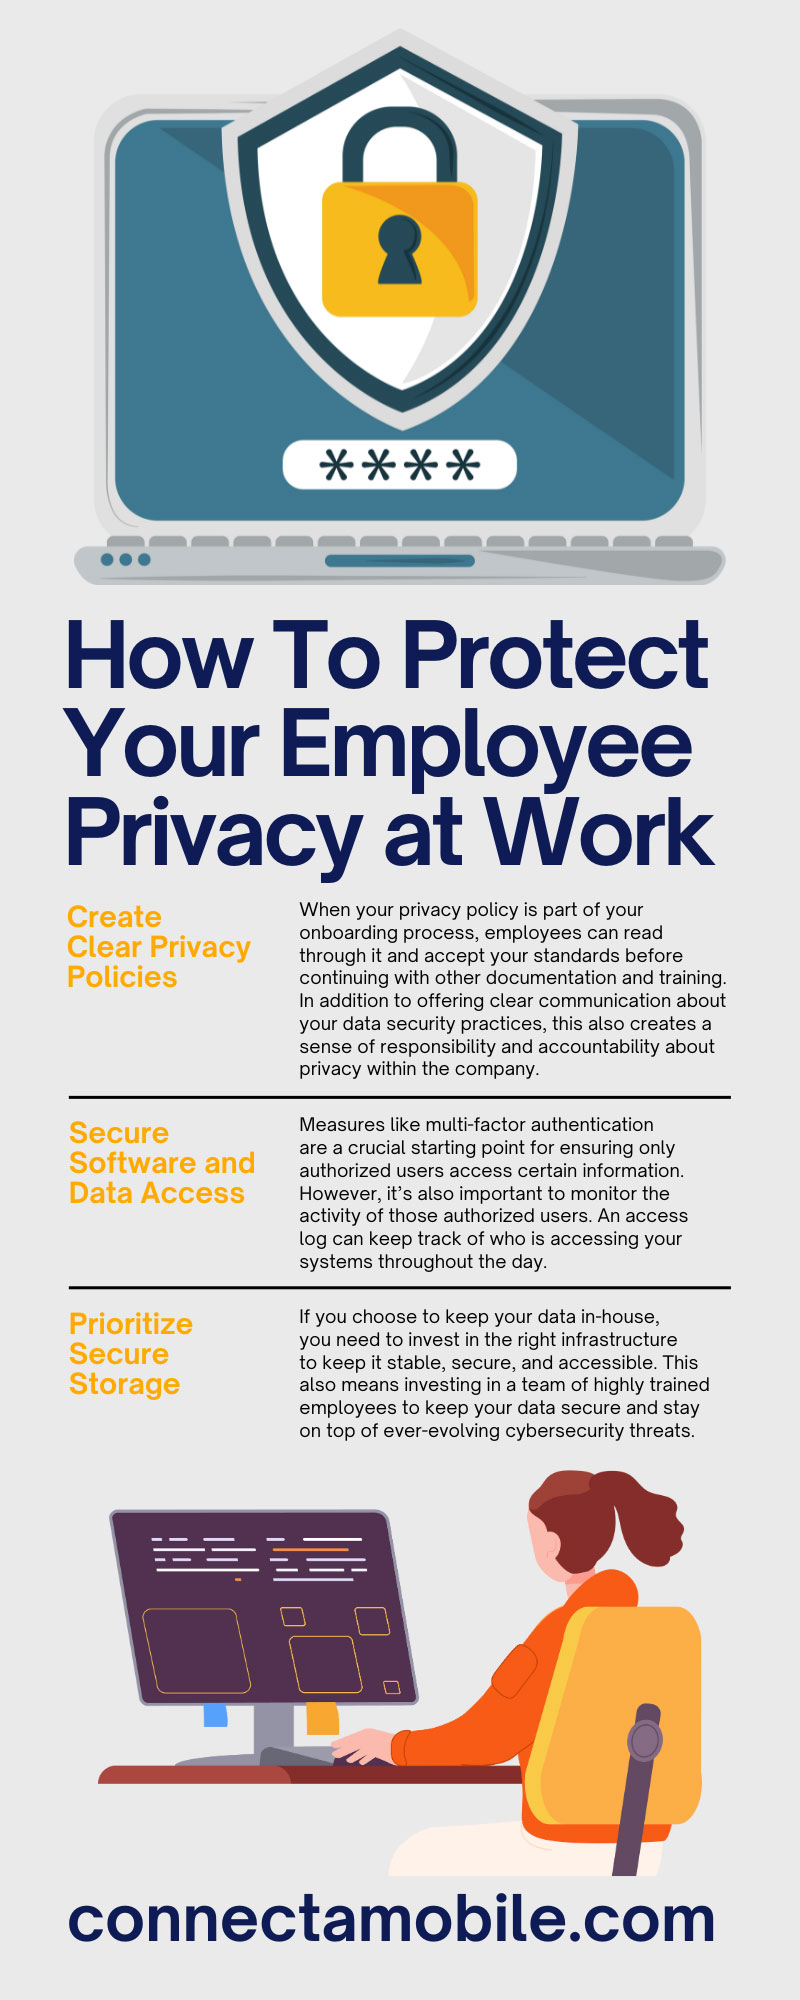 How To Protect Your Employee Privacy at Work